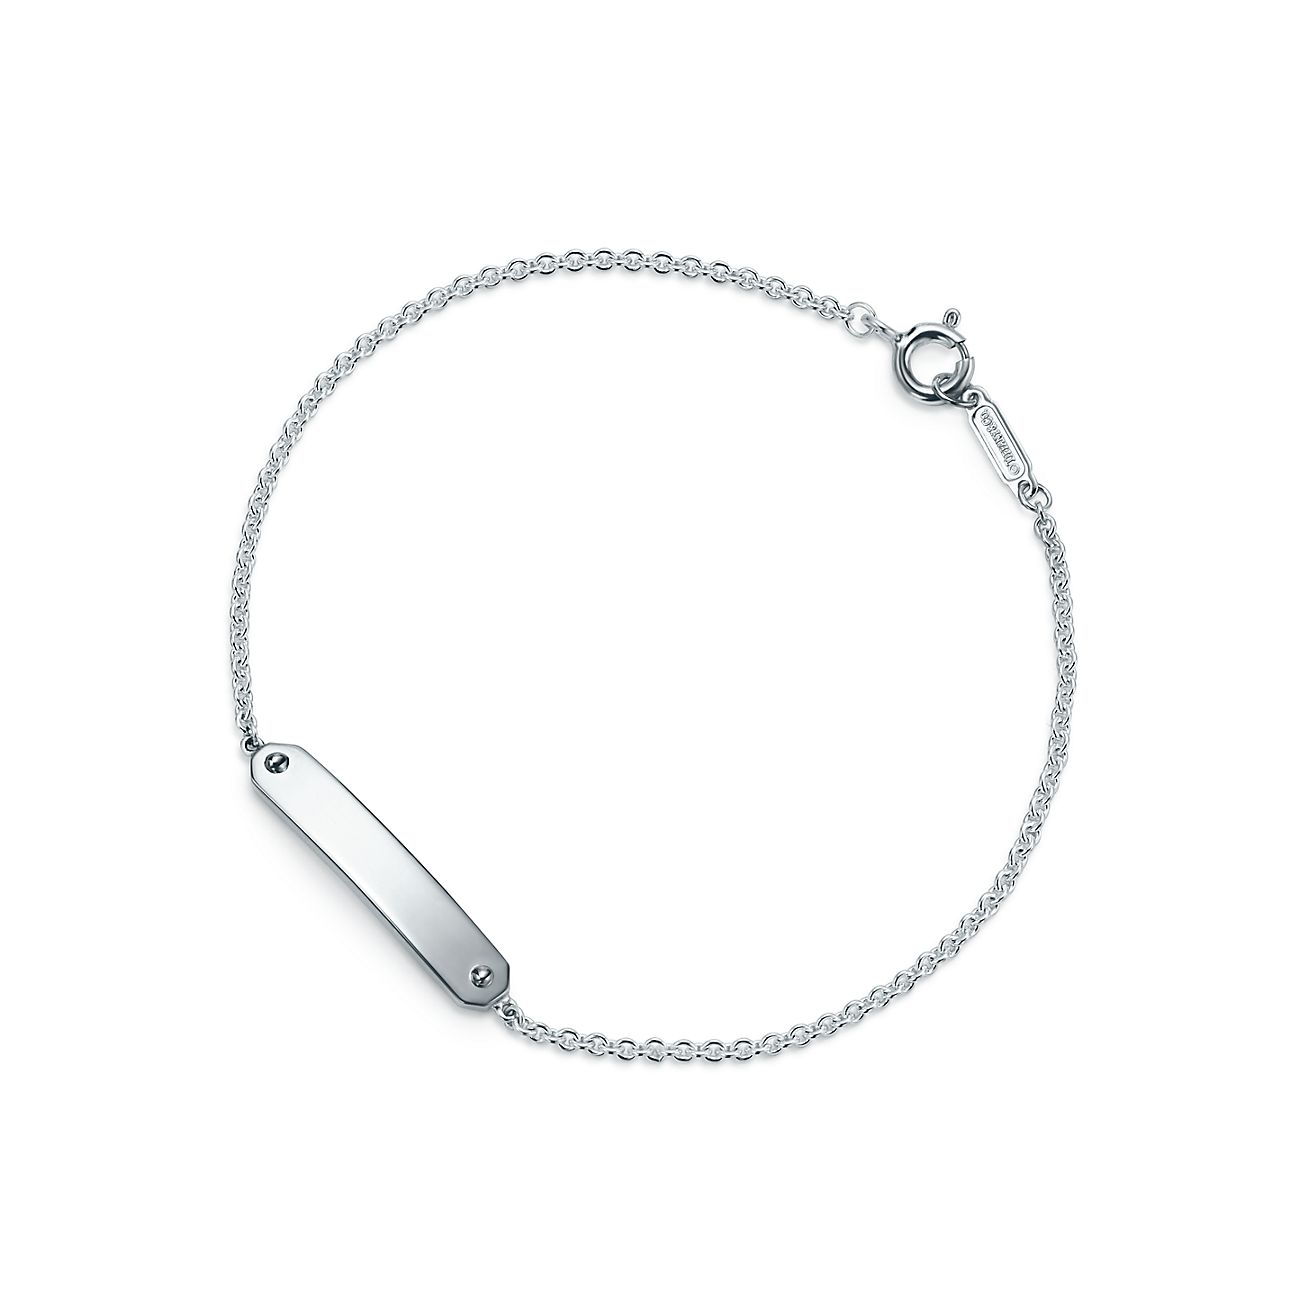 Tag chain bracelet in sterling silver 